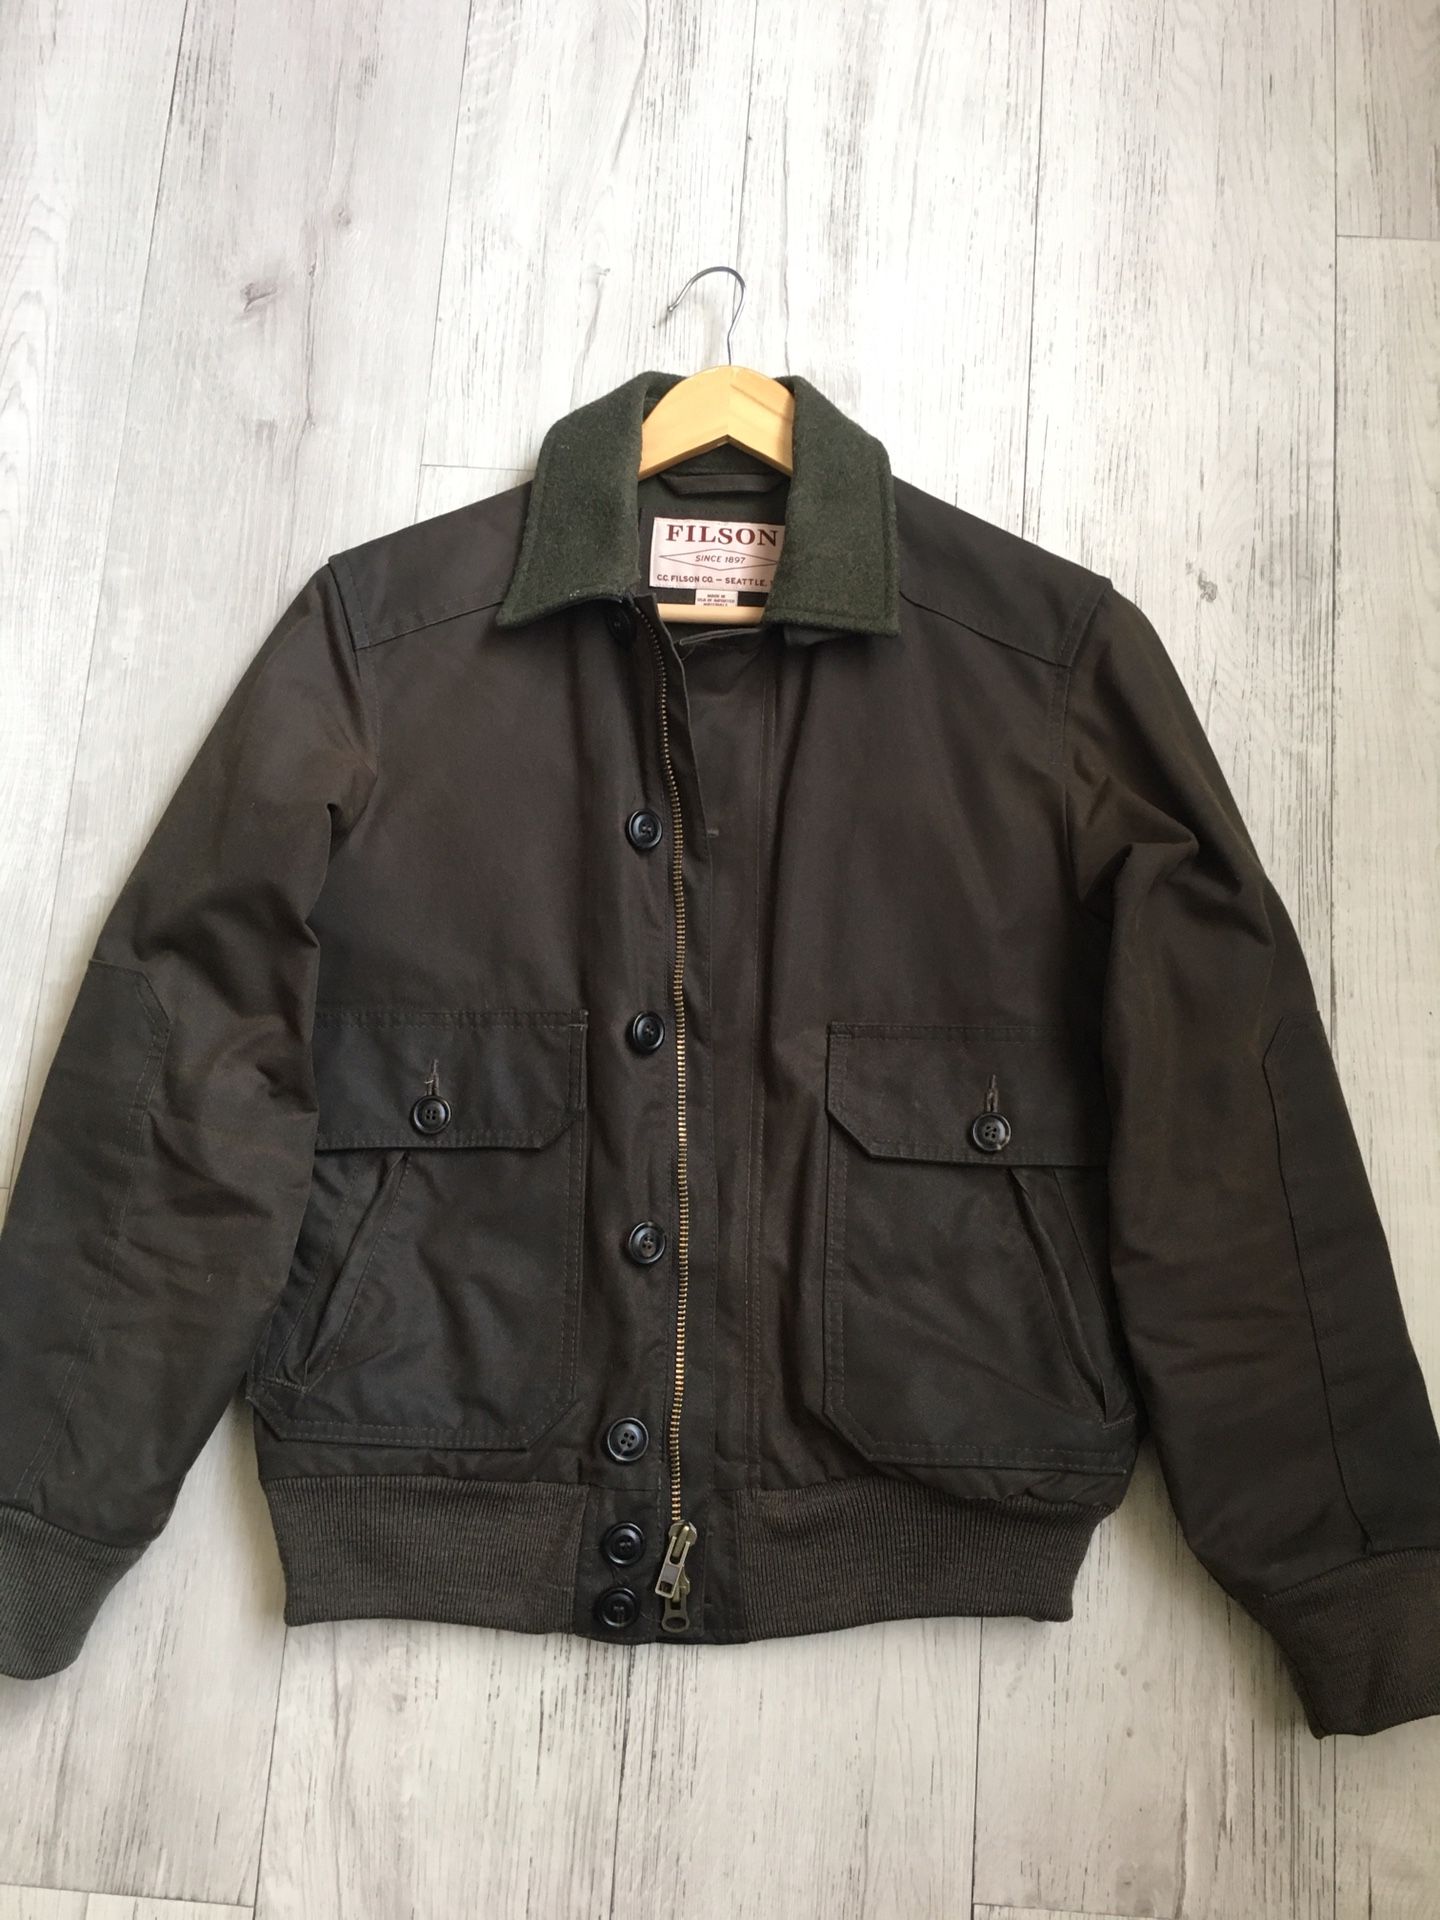 Filson Ranger Oil Cloth Bomber Jacket for Sale in Los Angeles, CA - OfferUp